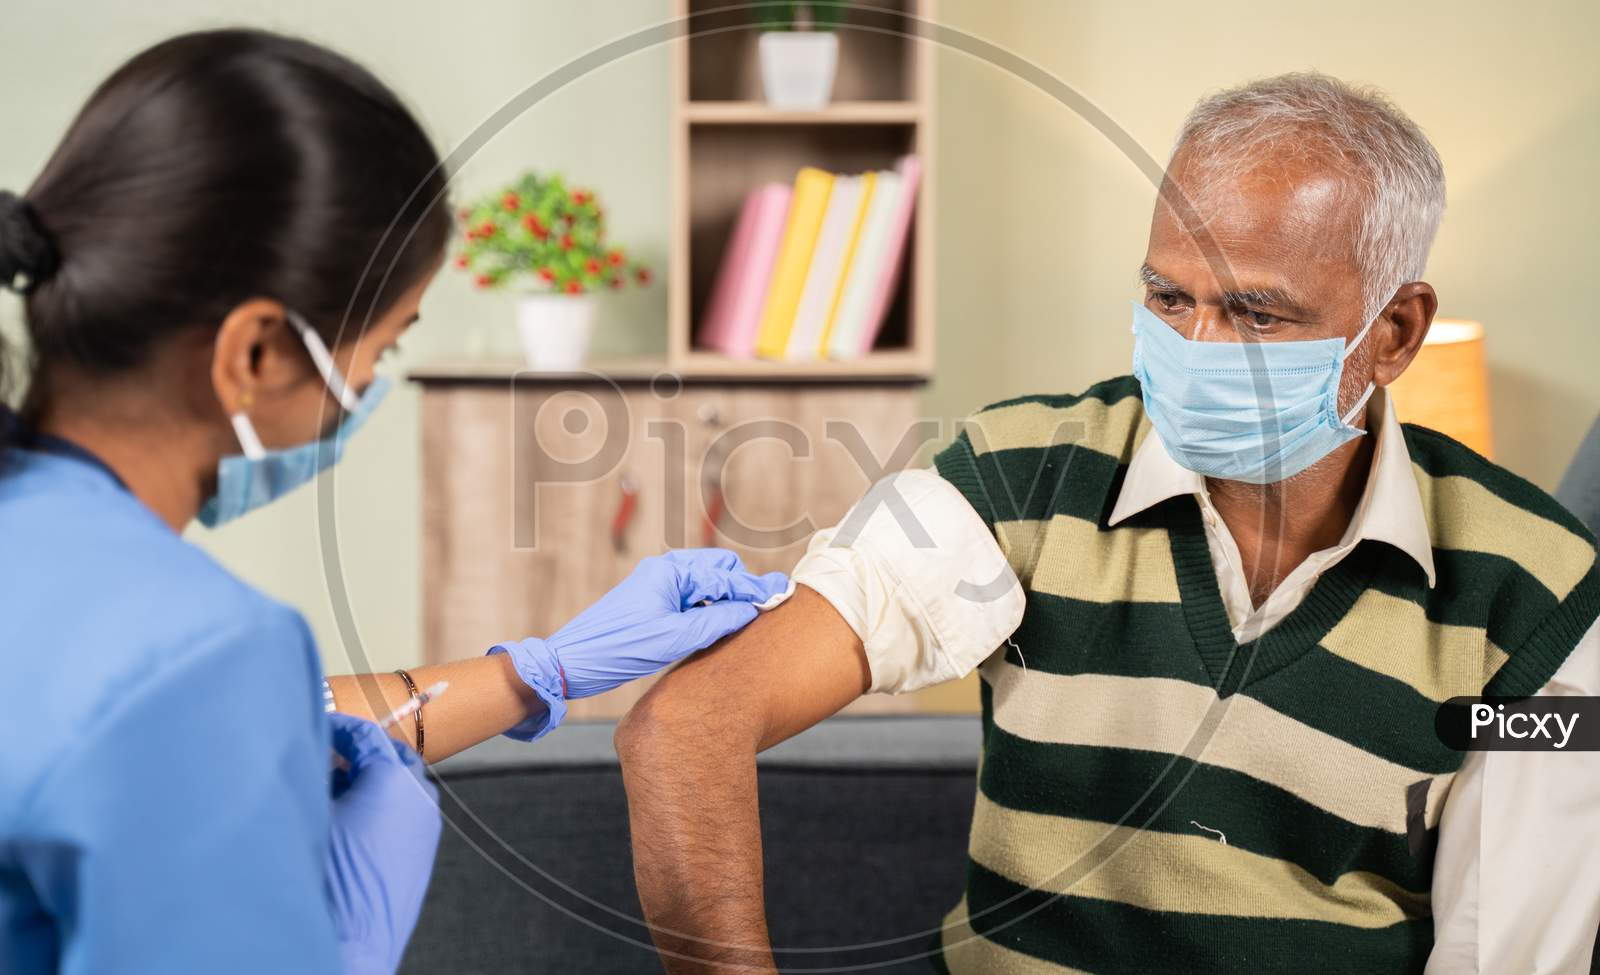 Doctor Preparing Vaccination Shot To Elderly Patient By Holding Syringe At Home - Concept Of Home Health Check To Seniors During Coronavirus Covid-19 Vaccine Immunization.